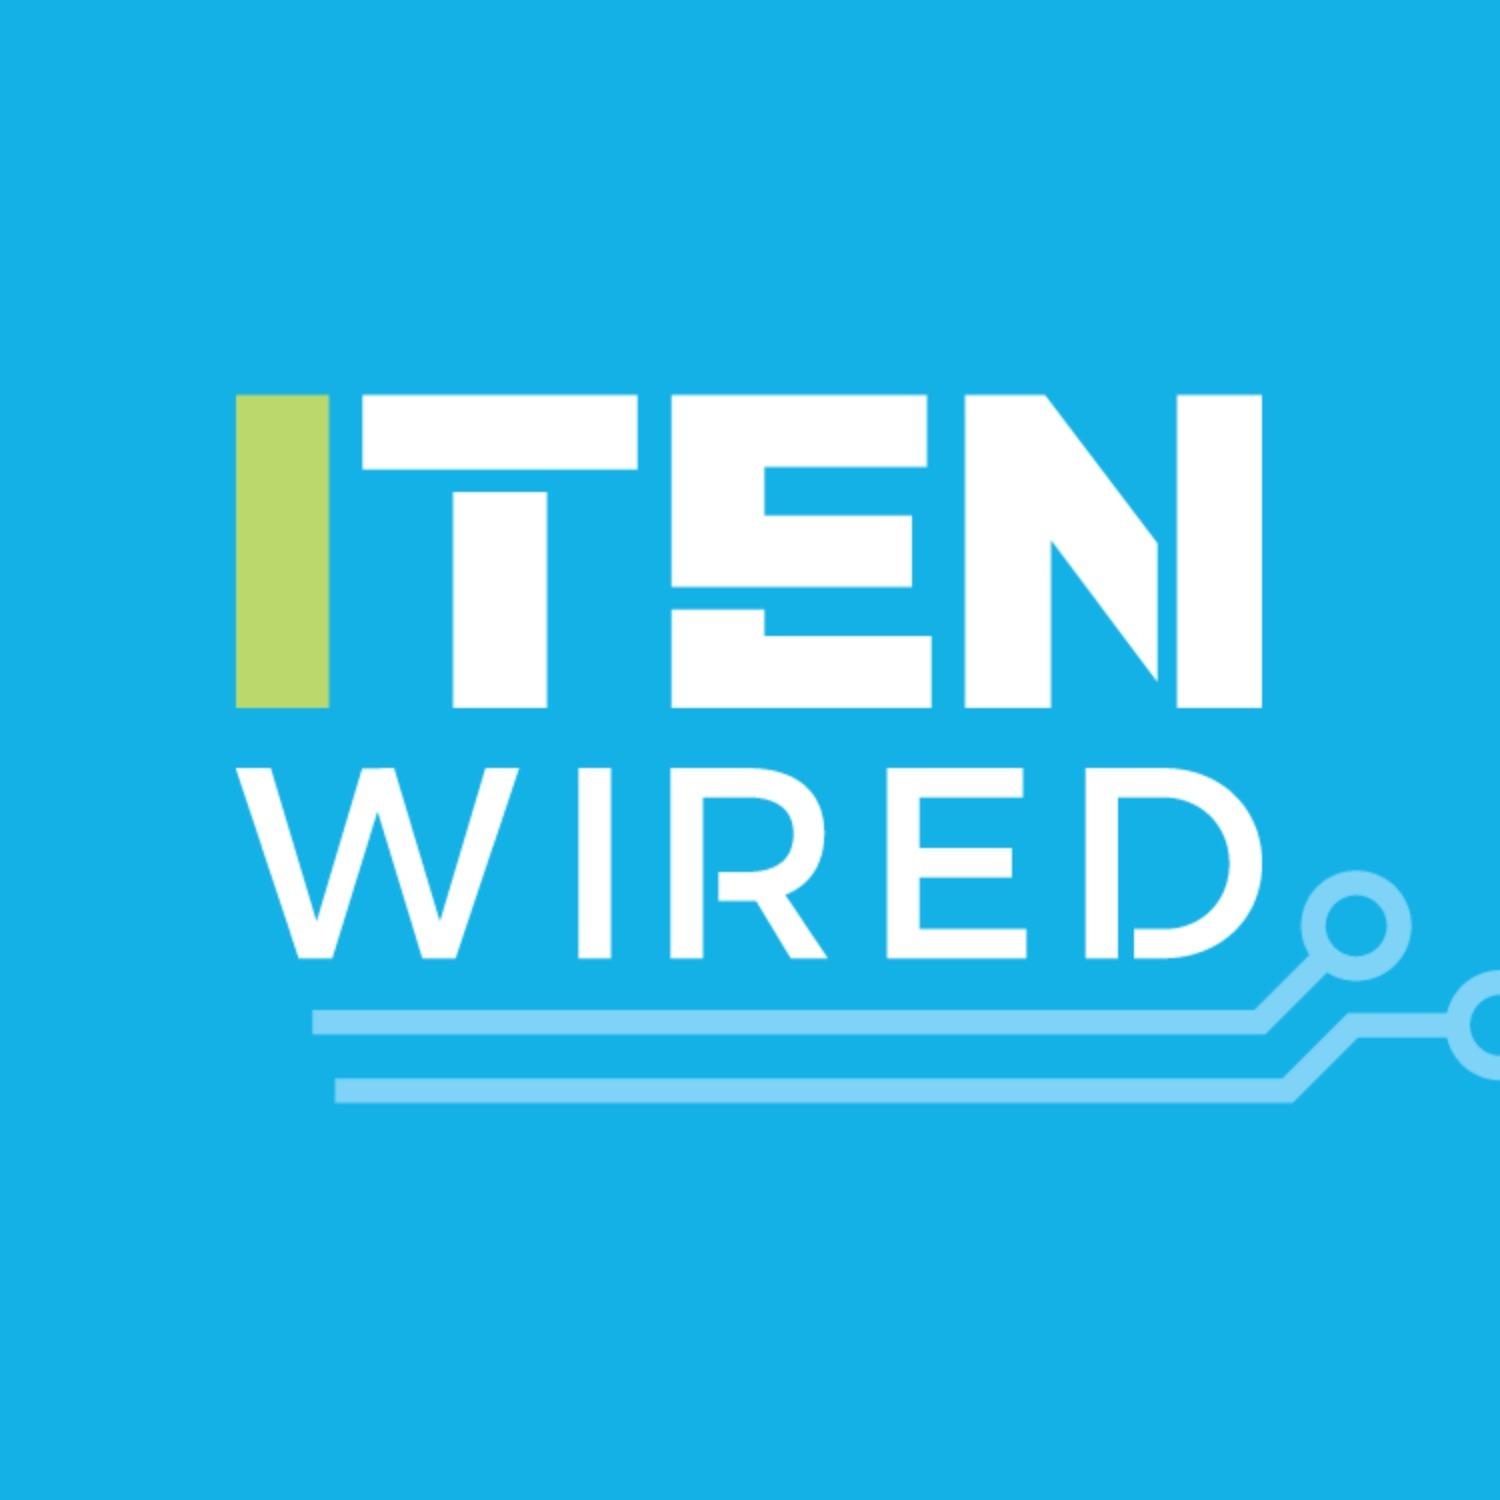 ITEN Wired Radio Ep 3: Sponsorships and Why You Want to Be one!!